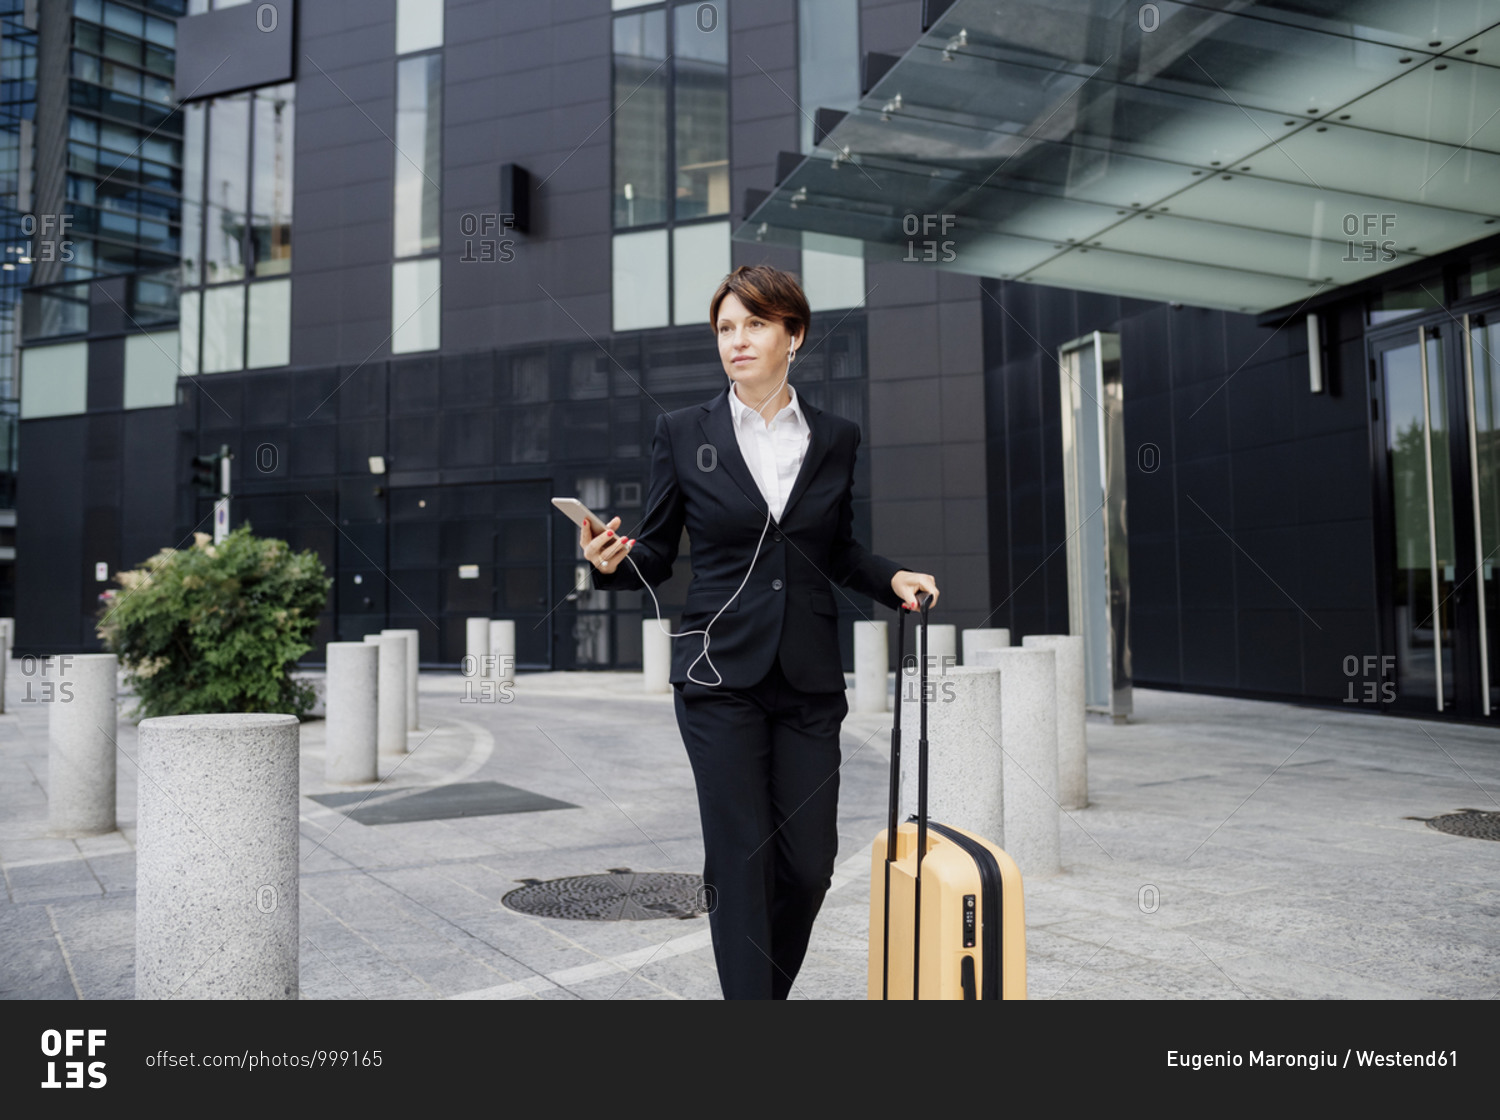 Female professional listening music while walking with suitcase against modern building